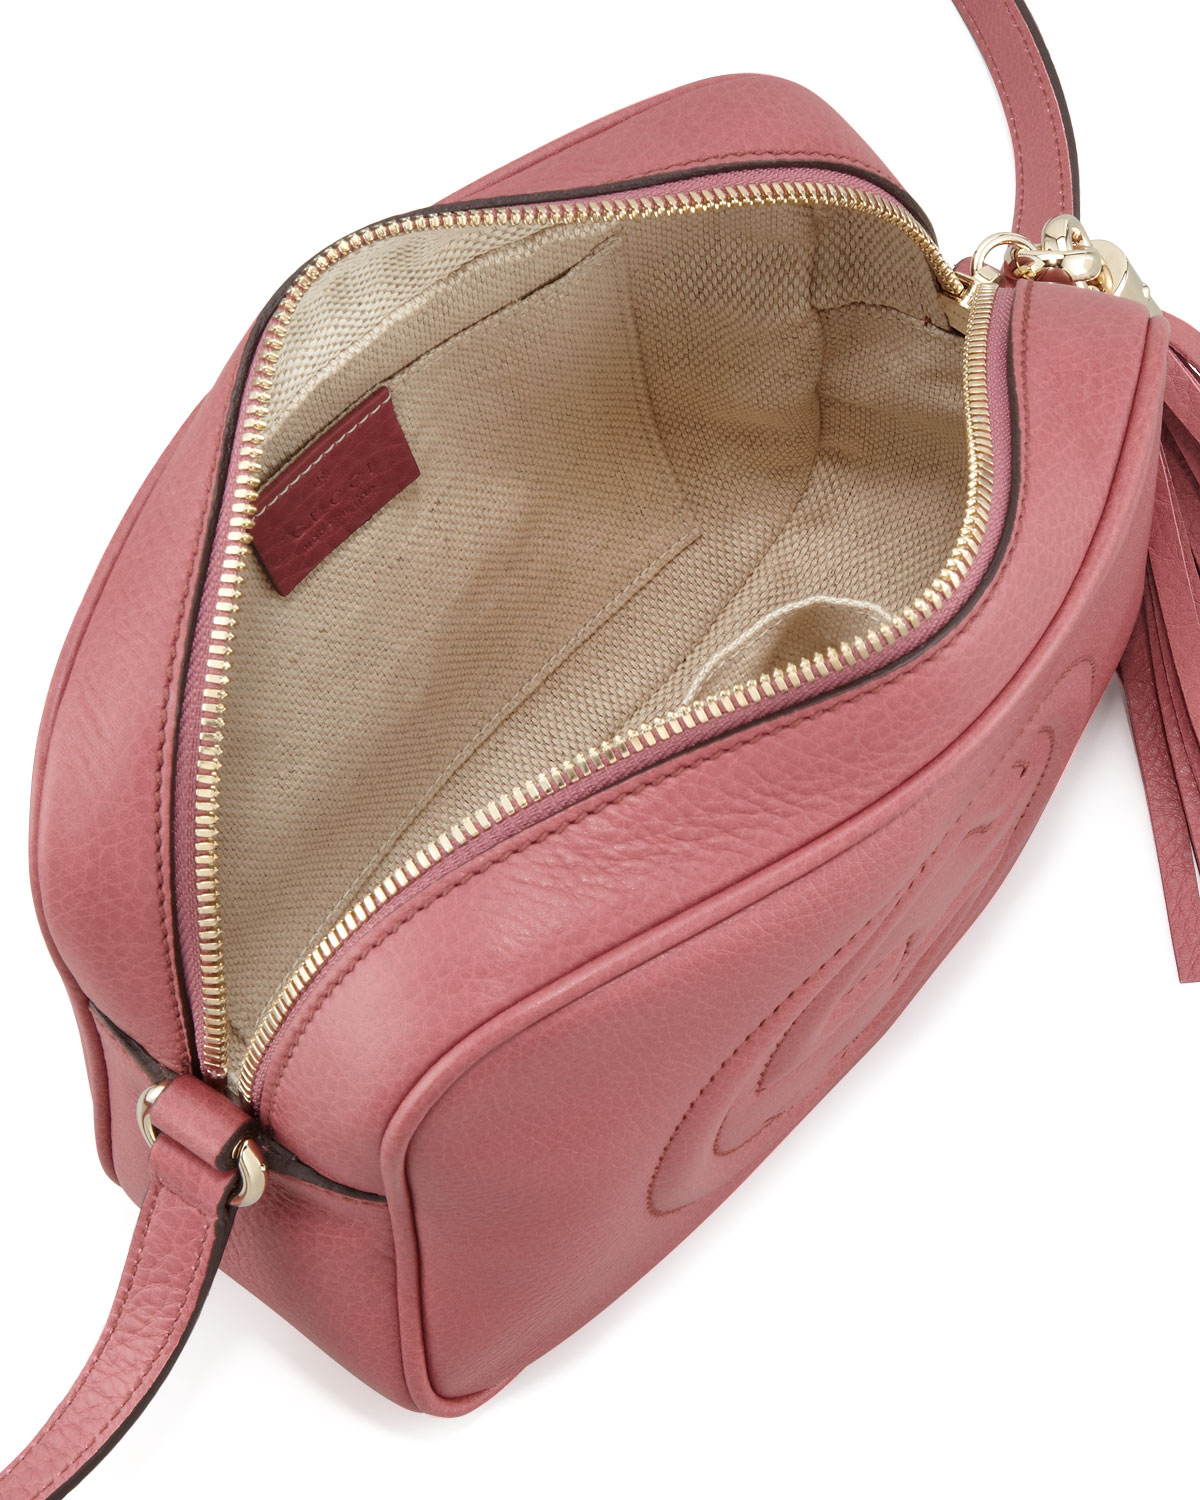 Gucci Soho Disco Bag Pink | Confederated Tribes of the Umatilla Indian Reservation